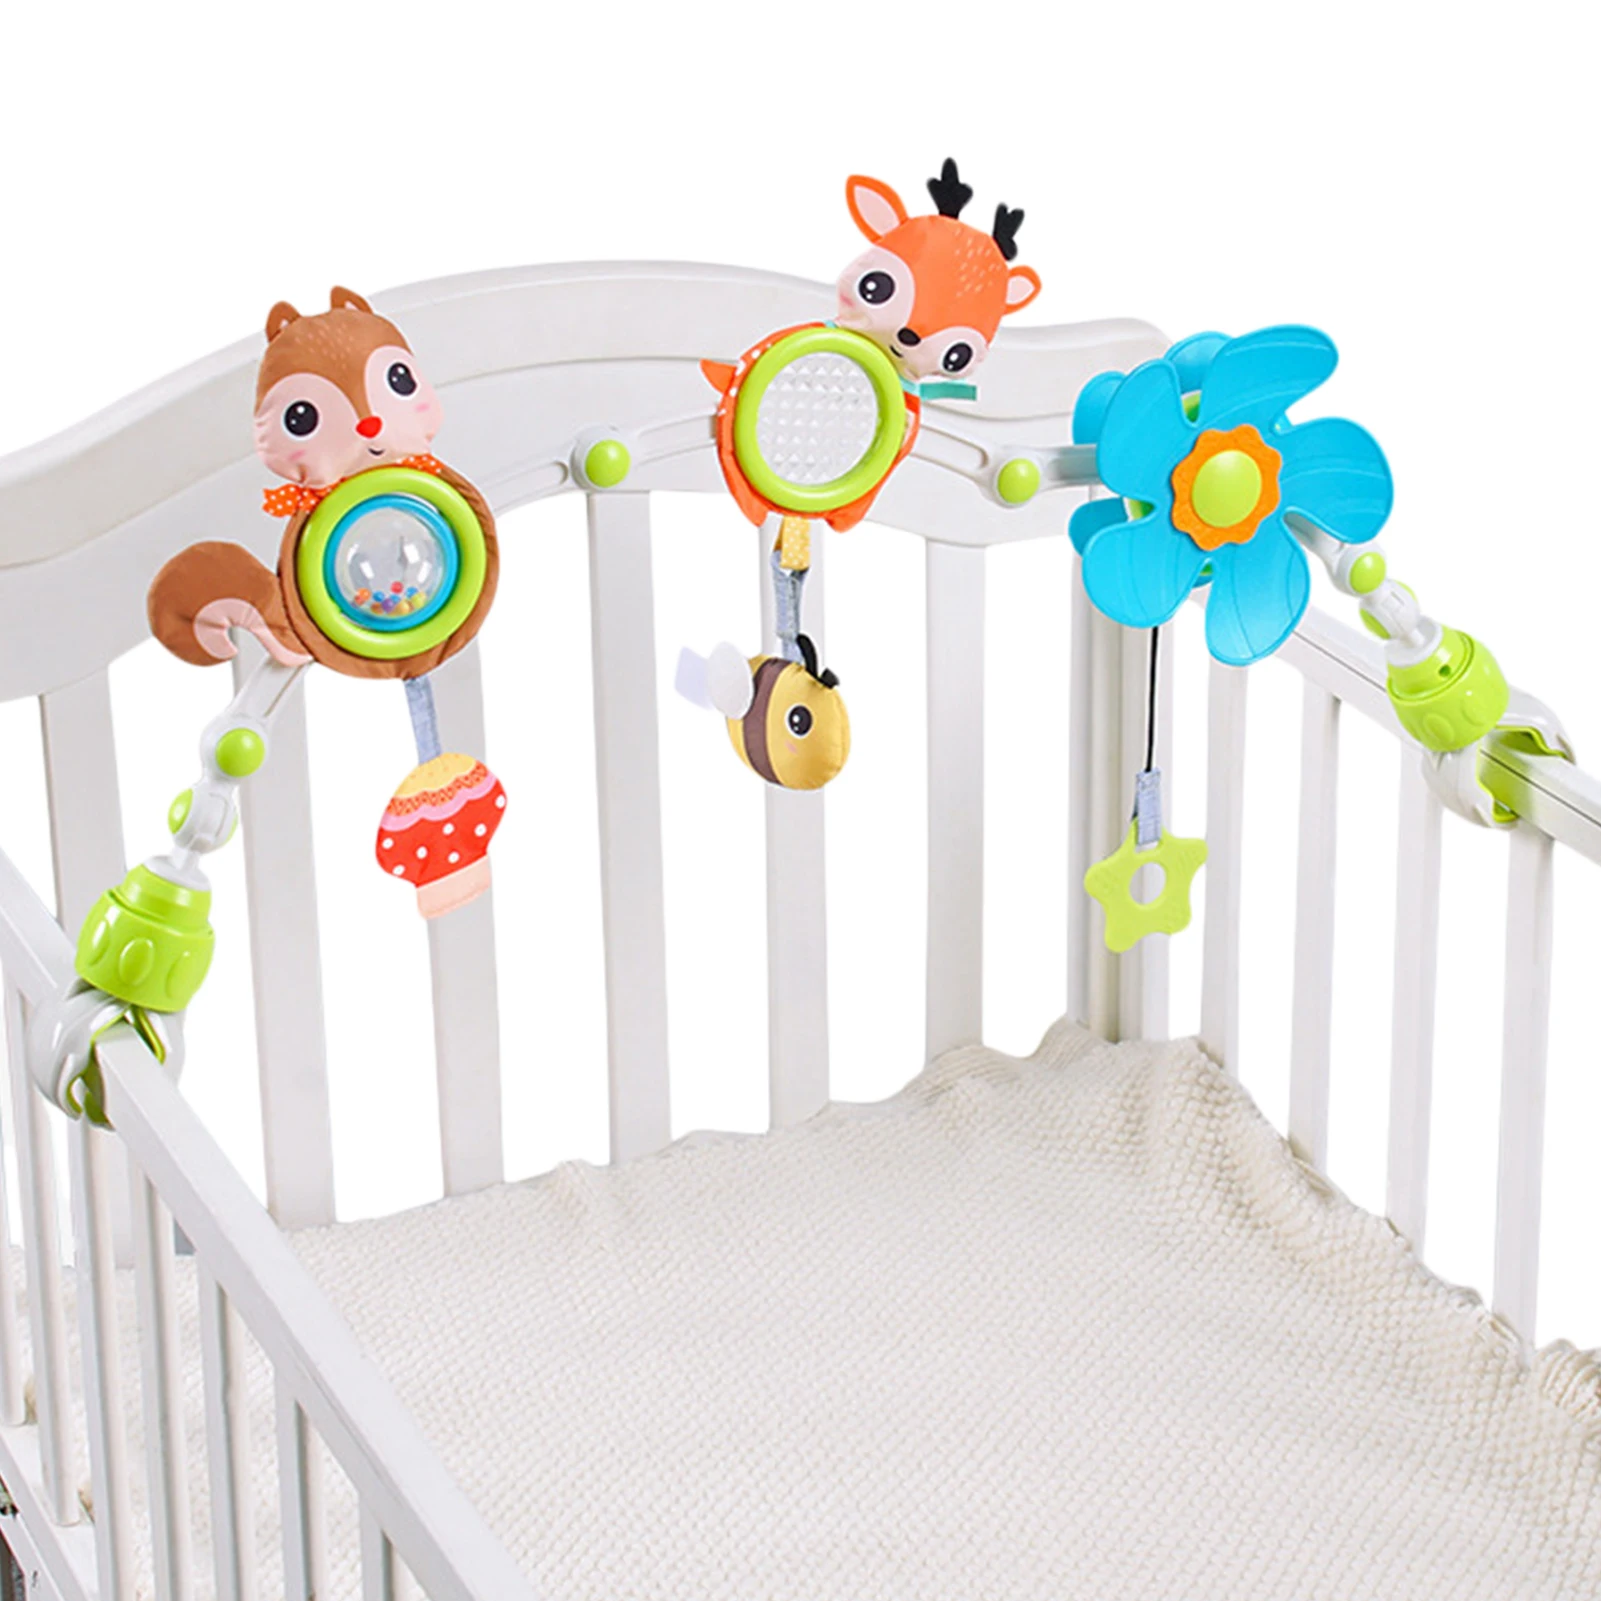 

Stroller Toys Stroller Arch Clip On Crib Carseat Toys Baby Toys 6 To 12 Months Cute Deer/Squirrel/Bee Baby Toys For Stroller